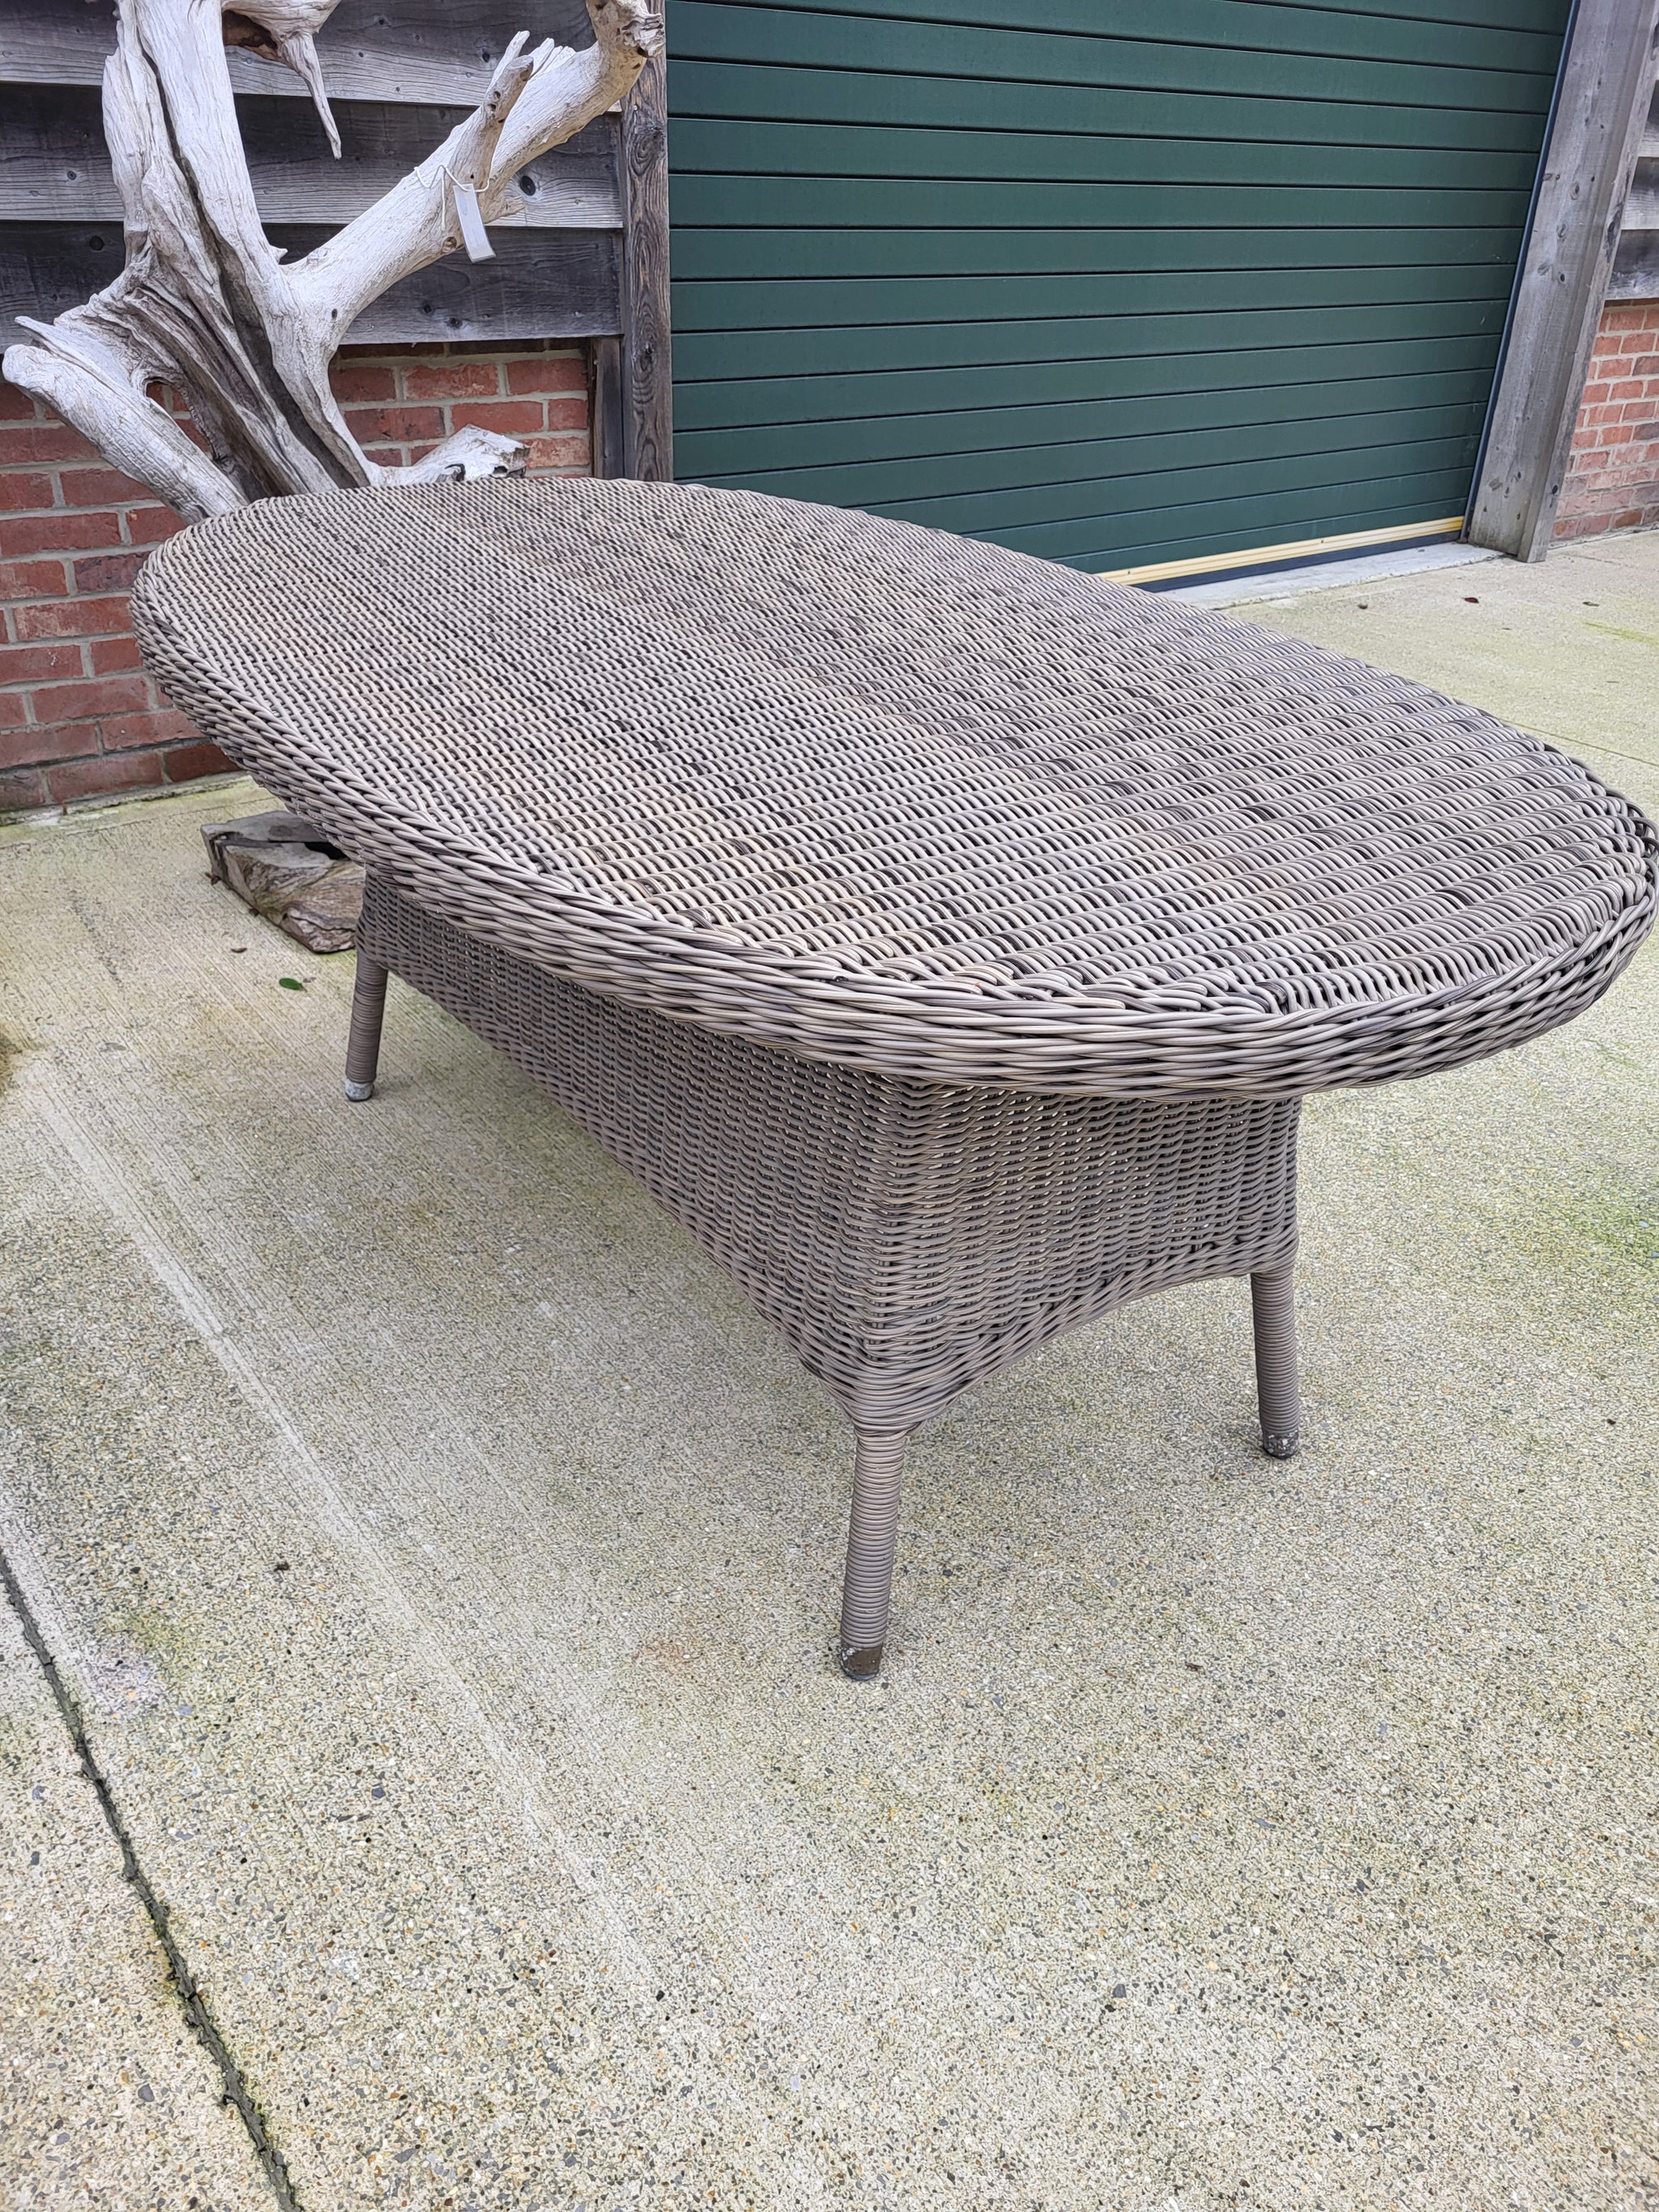 SALE - Oval Garden Rattan Wicker Table without glass 180 x 110cm (FSMPS0T6)